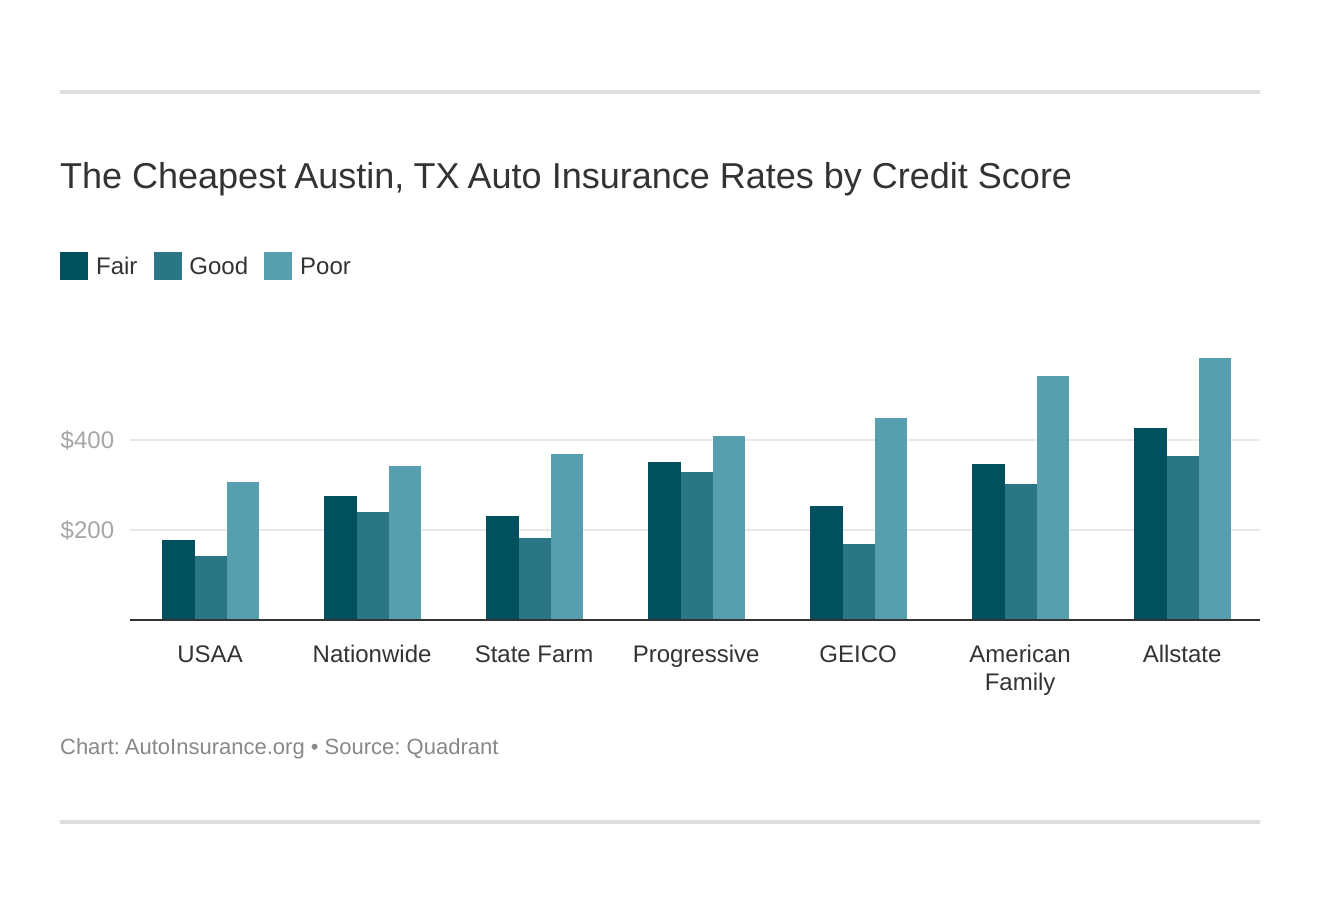 The Cheapest Austin, TX Auto Insurance Rates by Credit Score